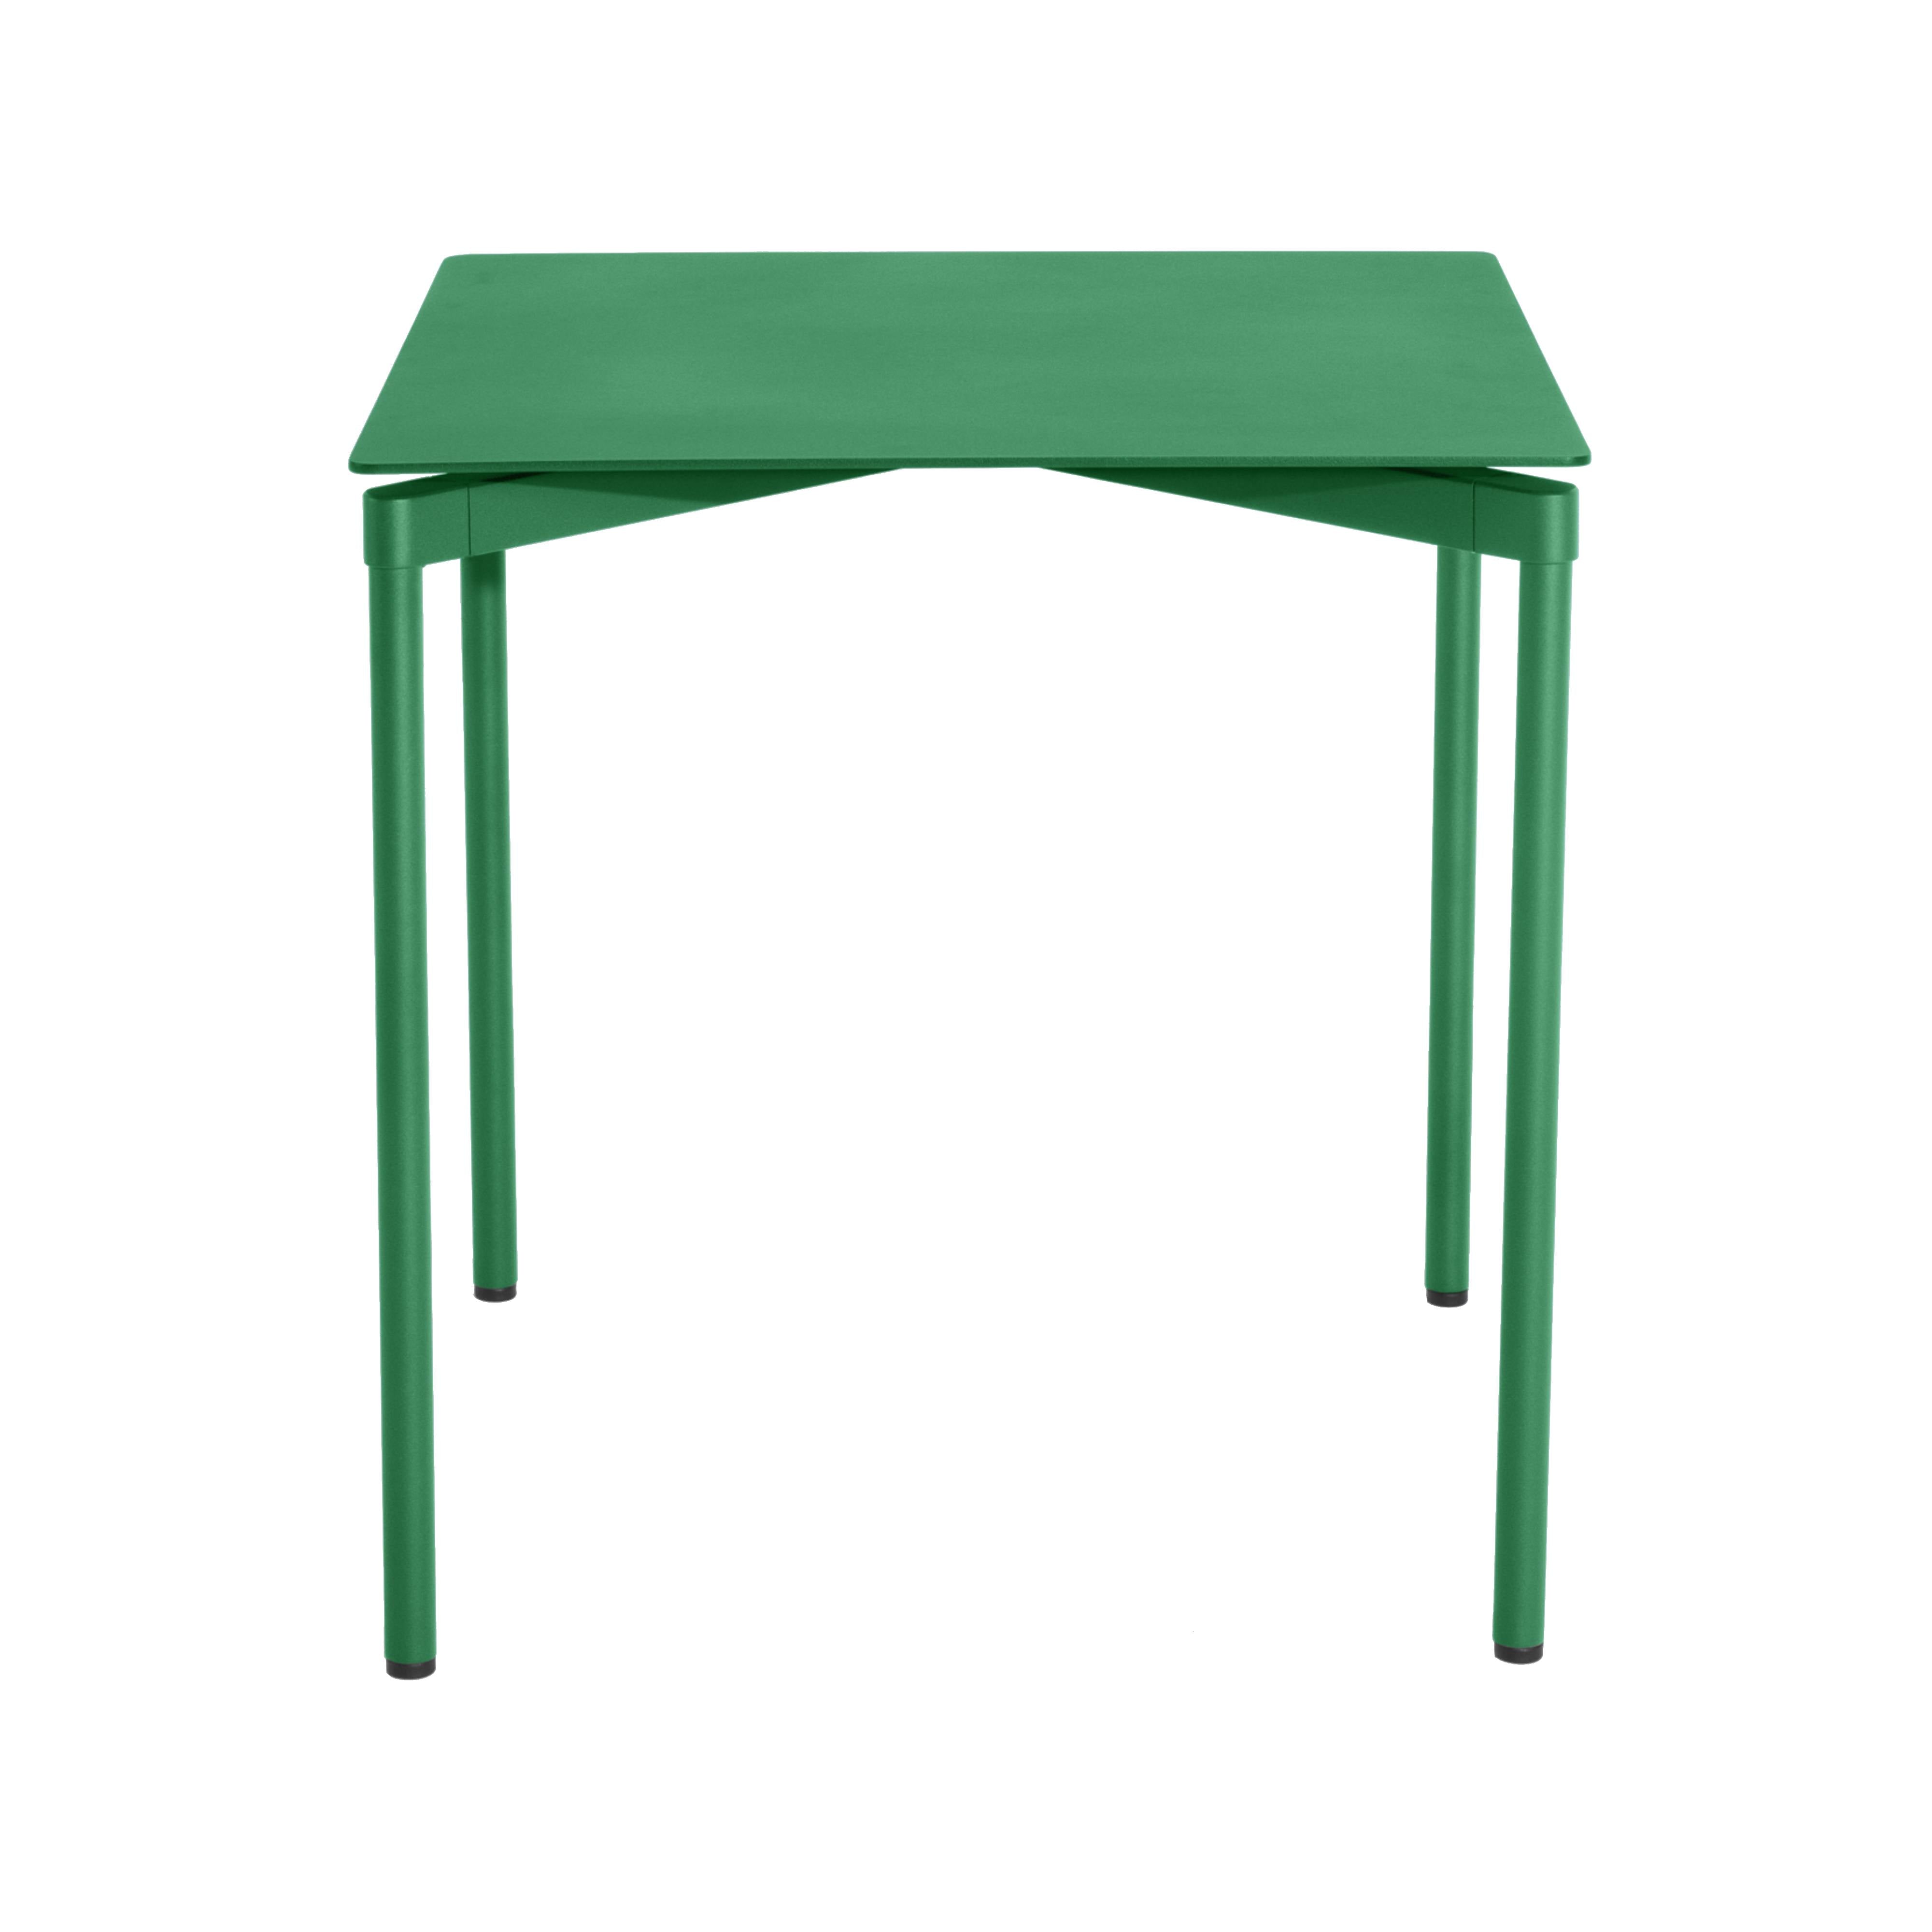 Fromme Dining Table: Square + Mint Green